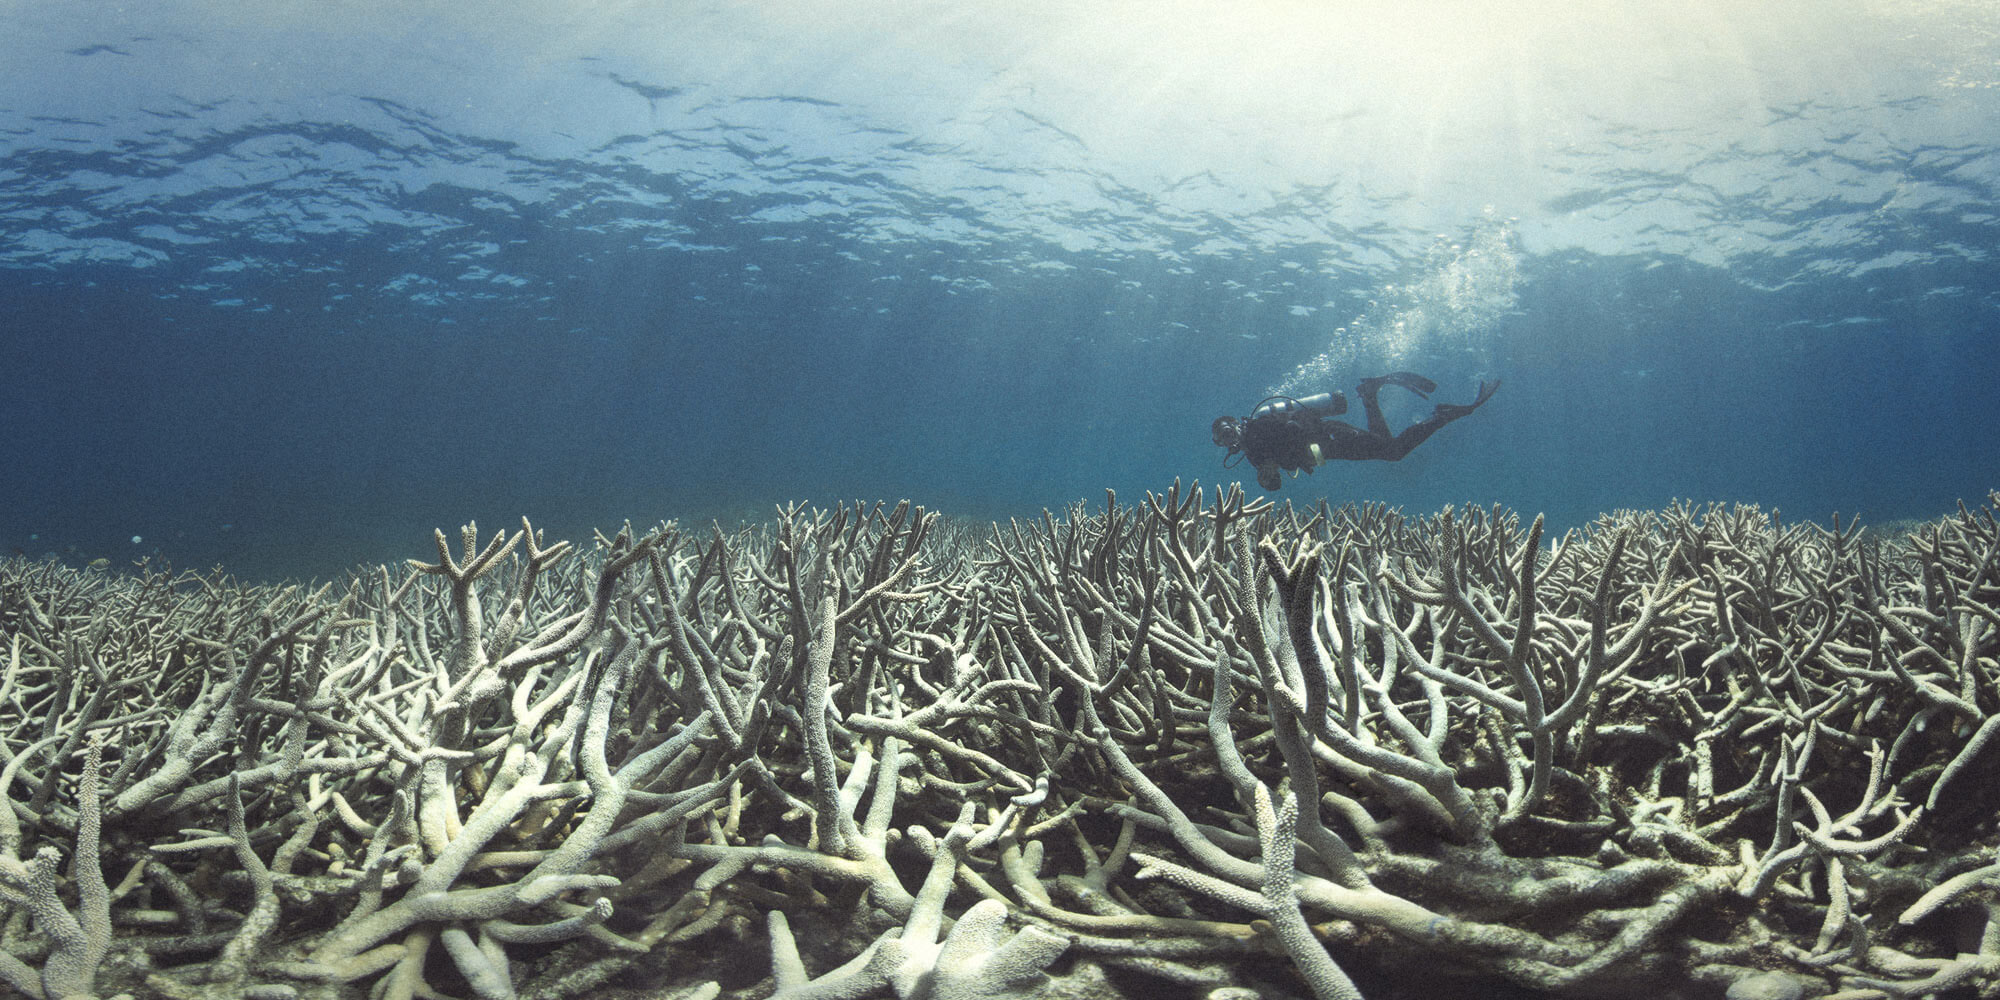 Scuba diver looking at bleached coral that has died